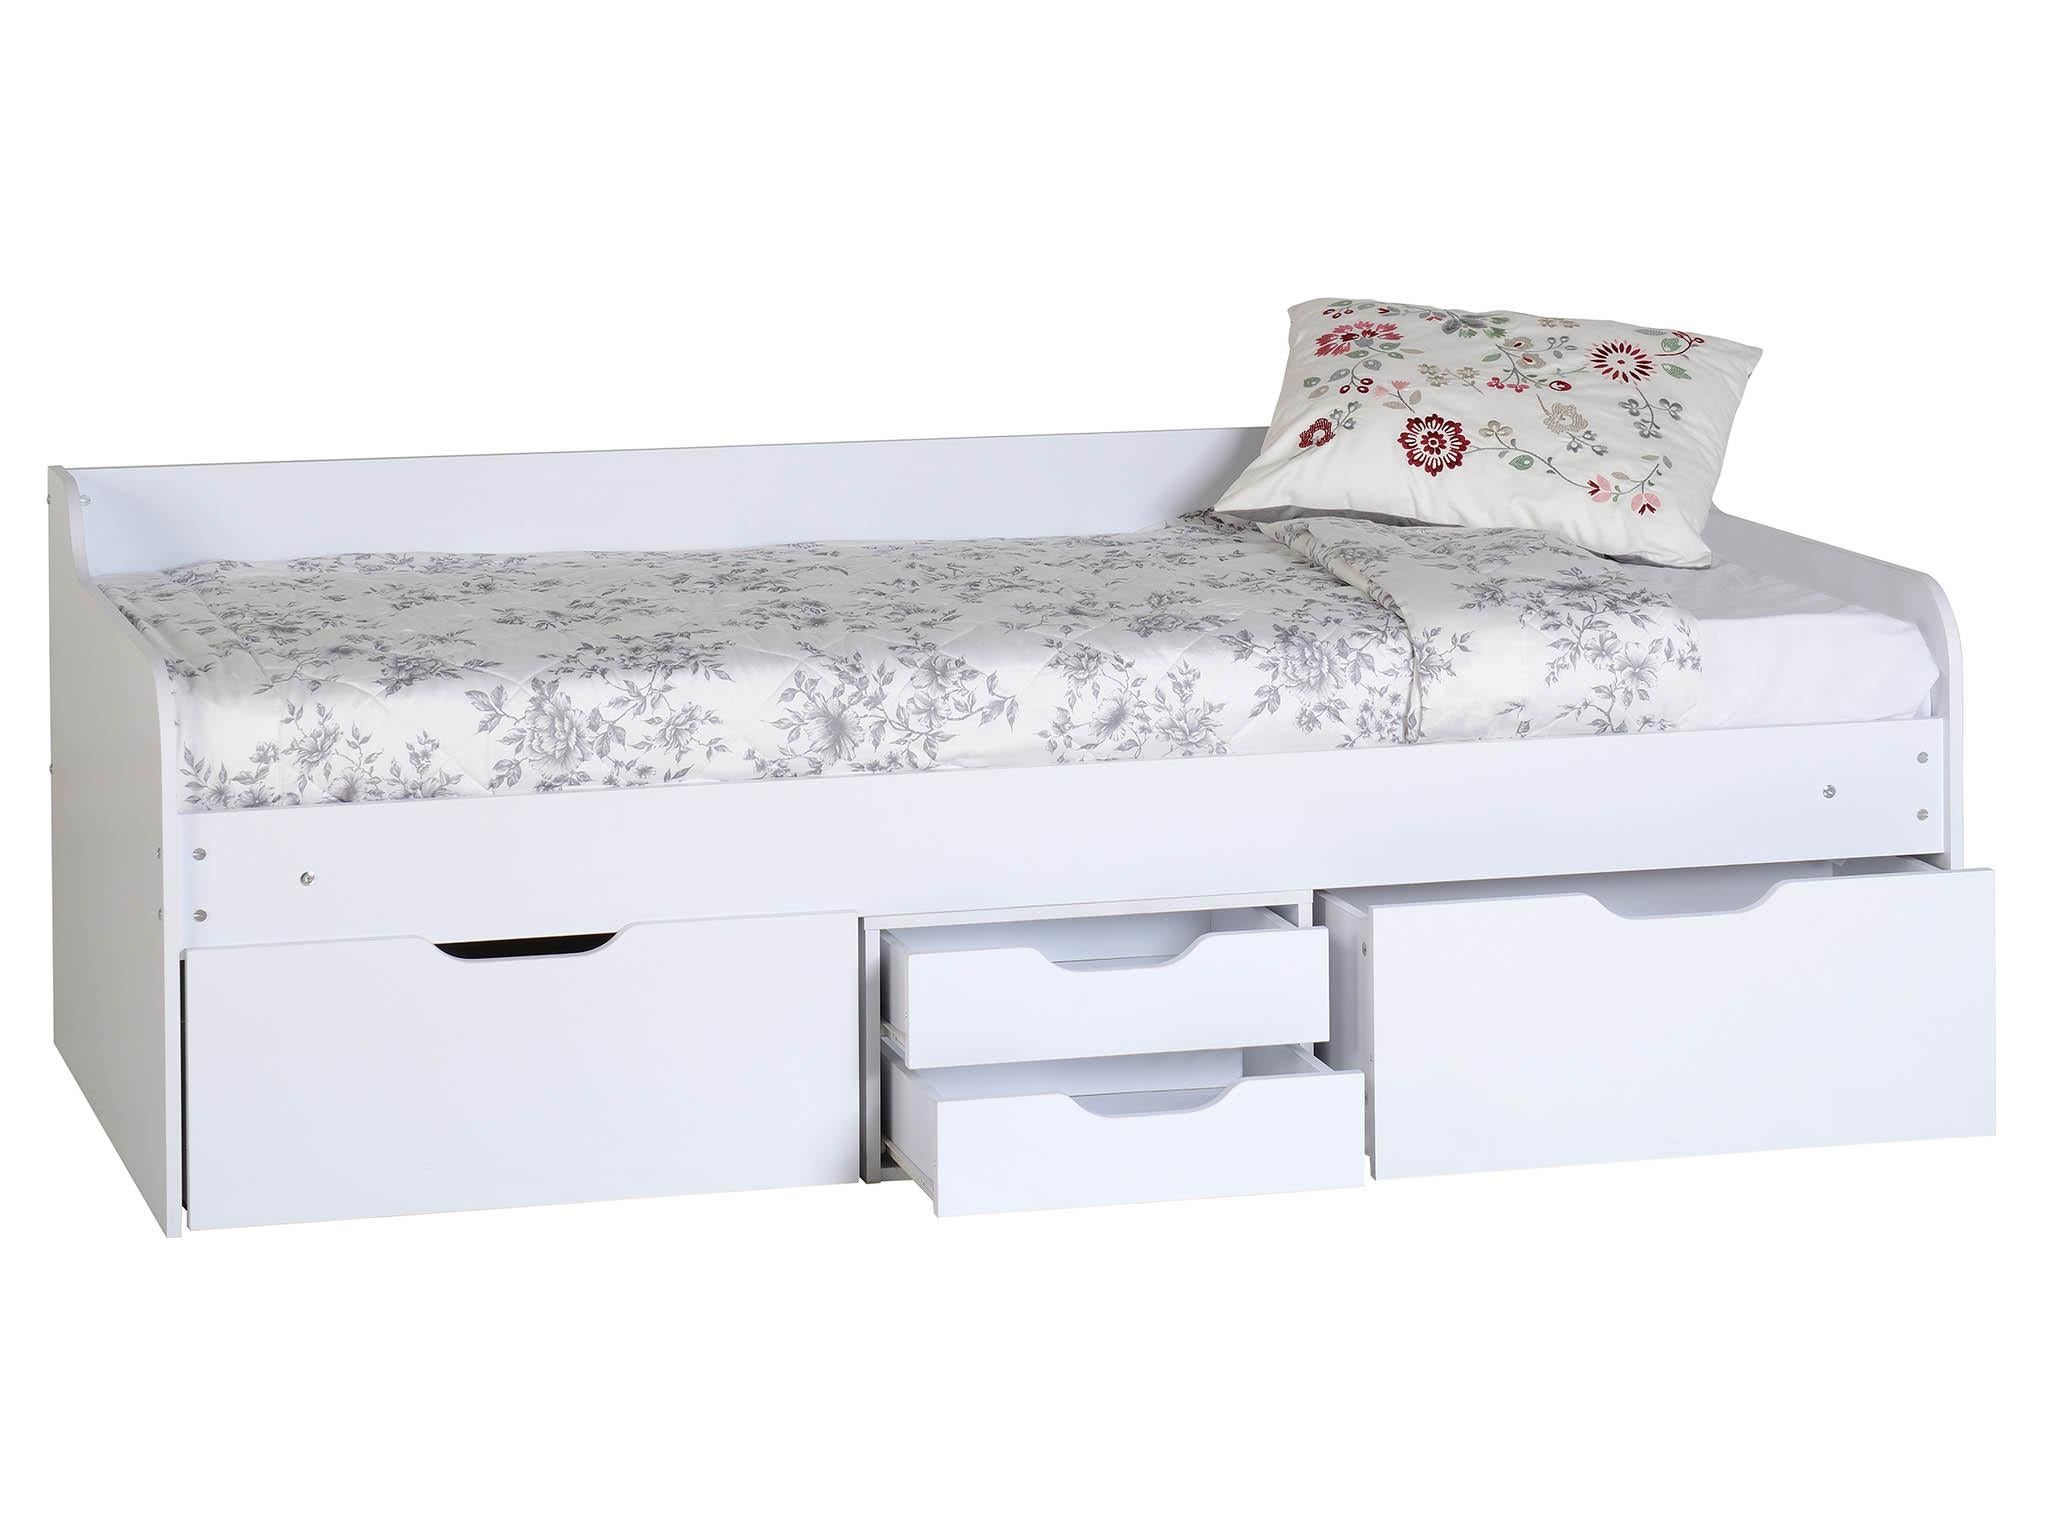 best childrens single beds